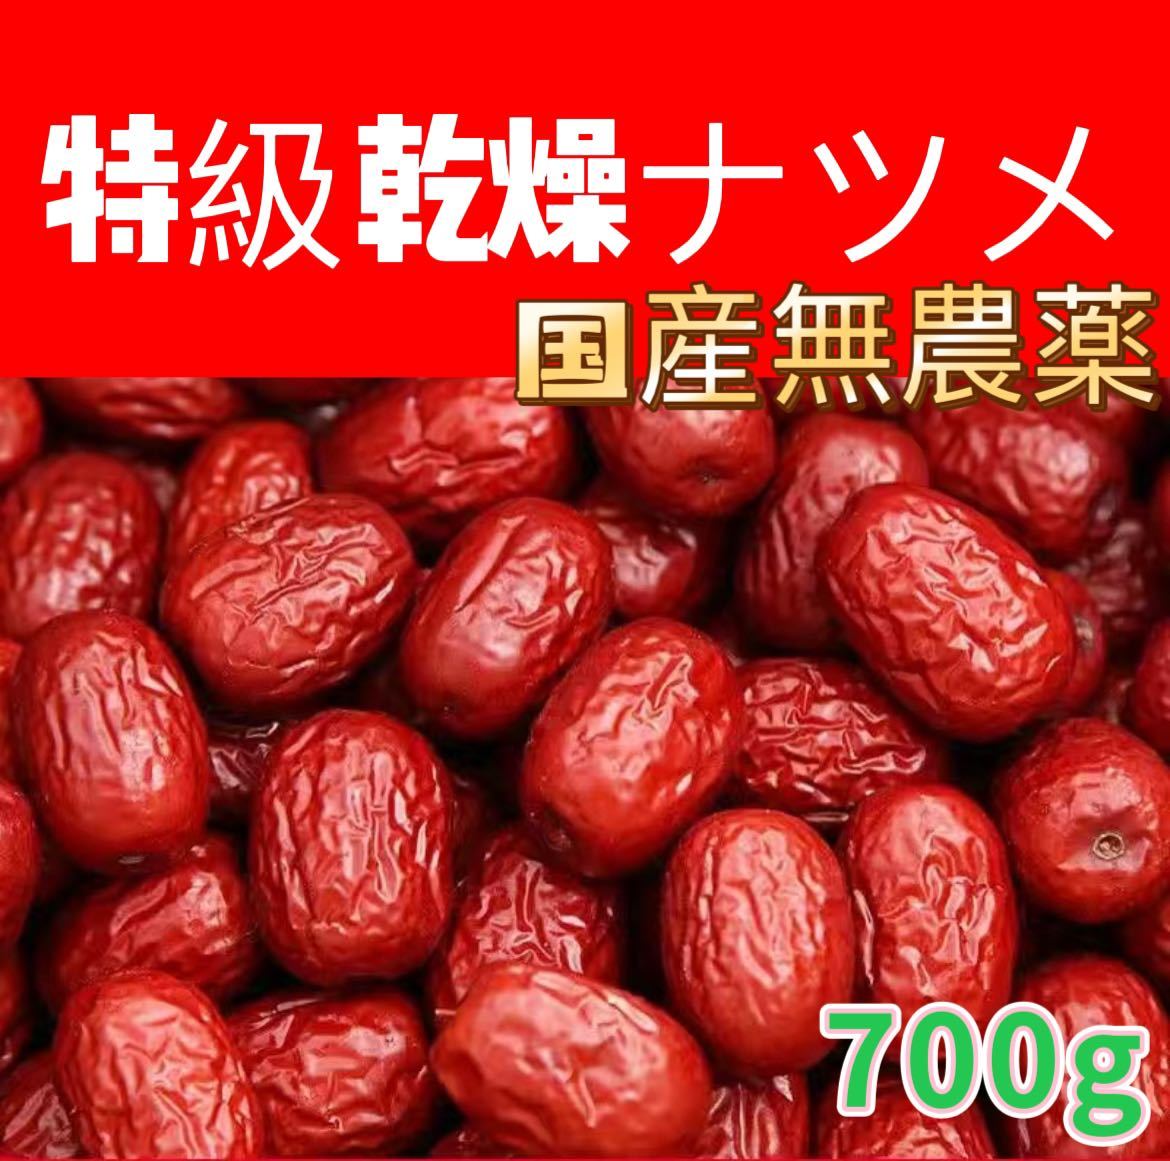  dry jujube kind equipped less pesticide 700g